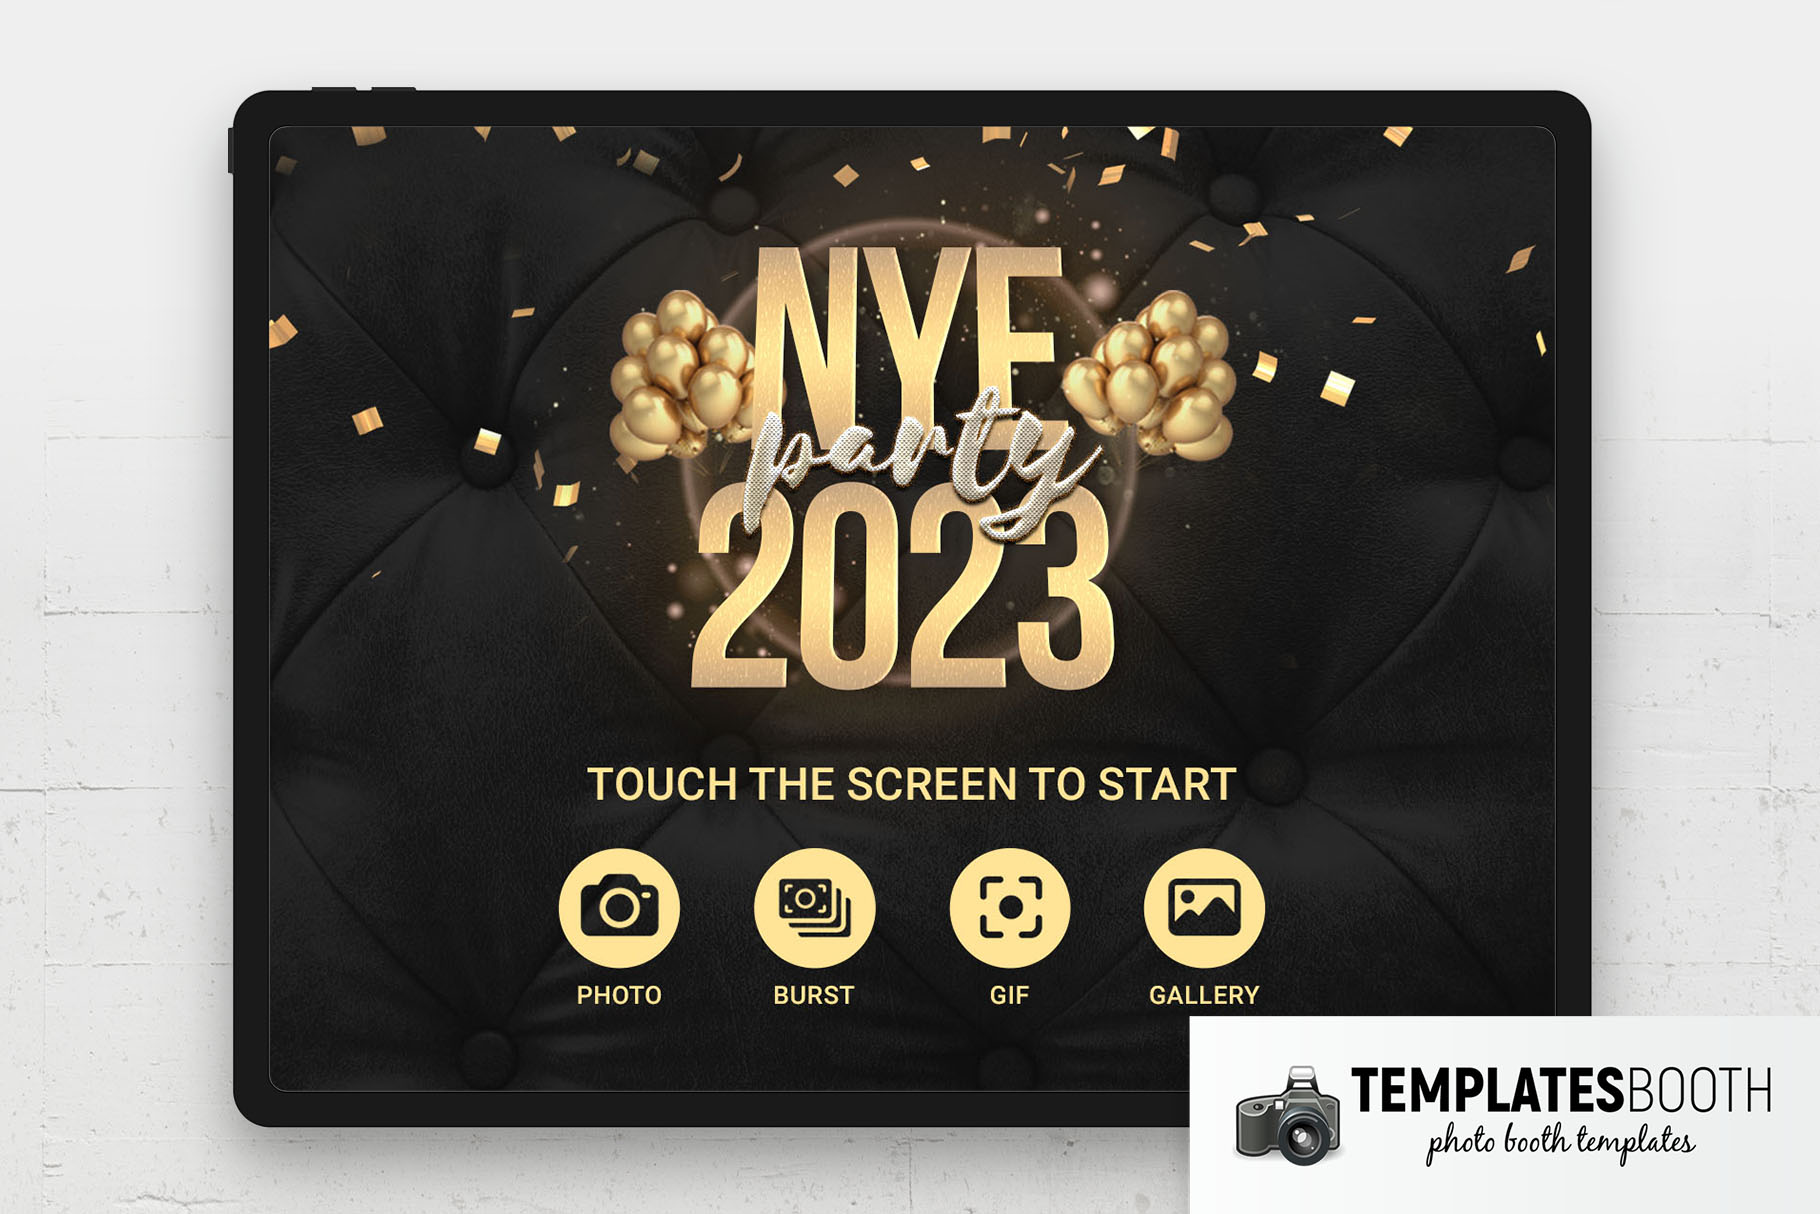 New Year's Eve Photo Booth Welcome Screen